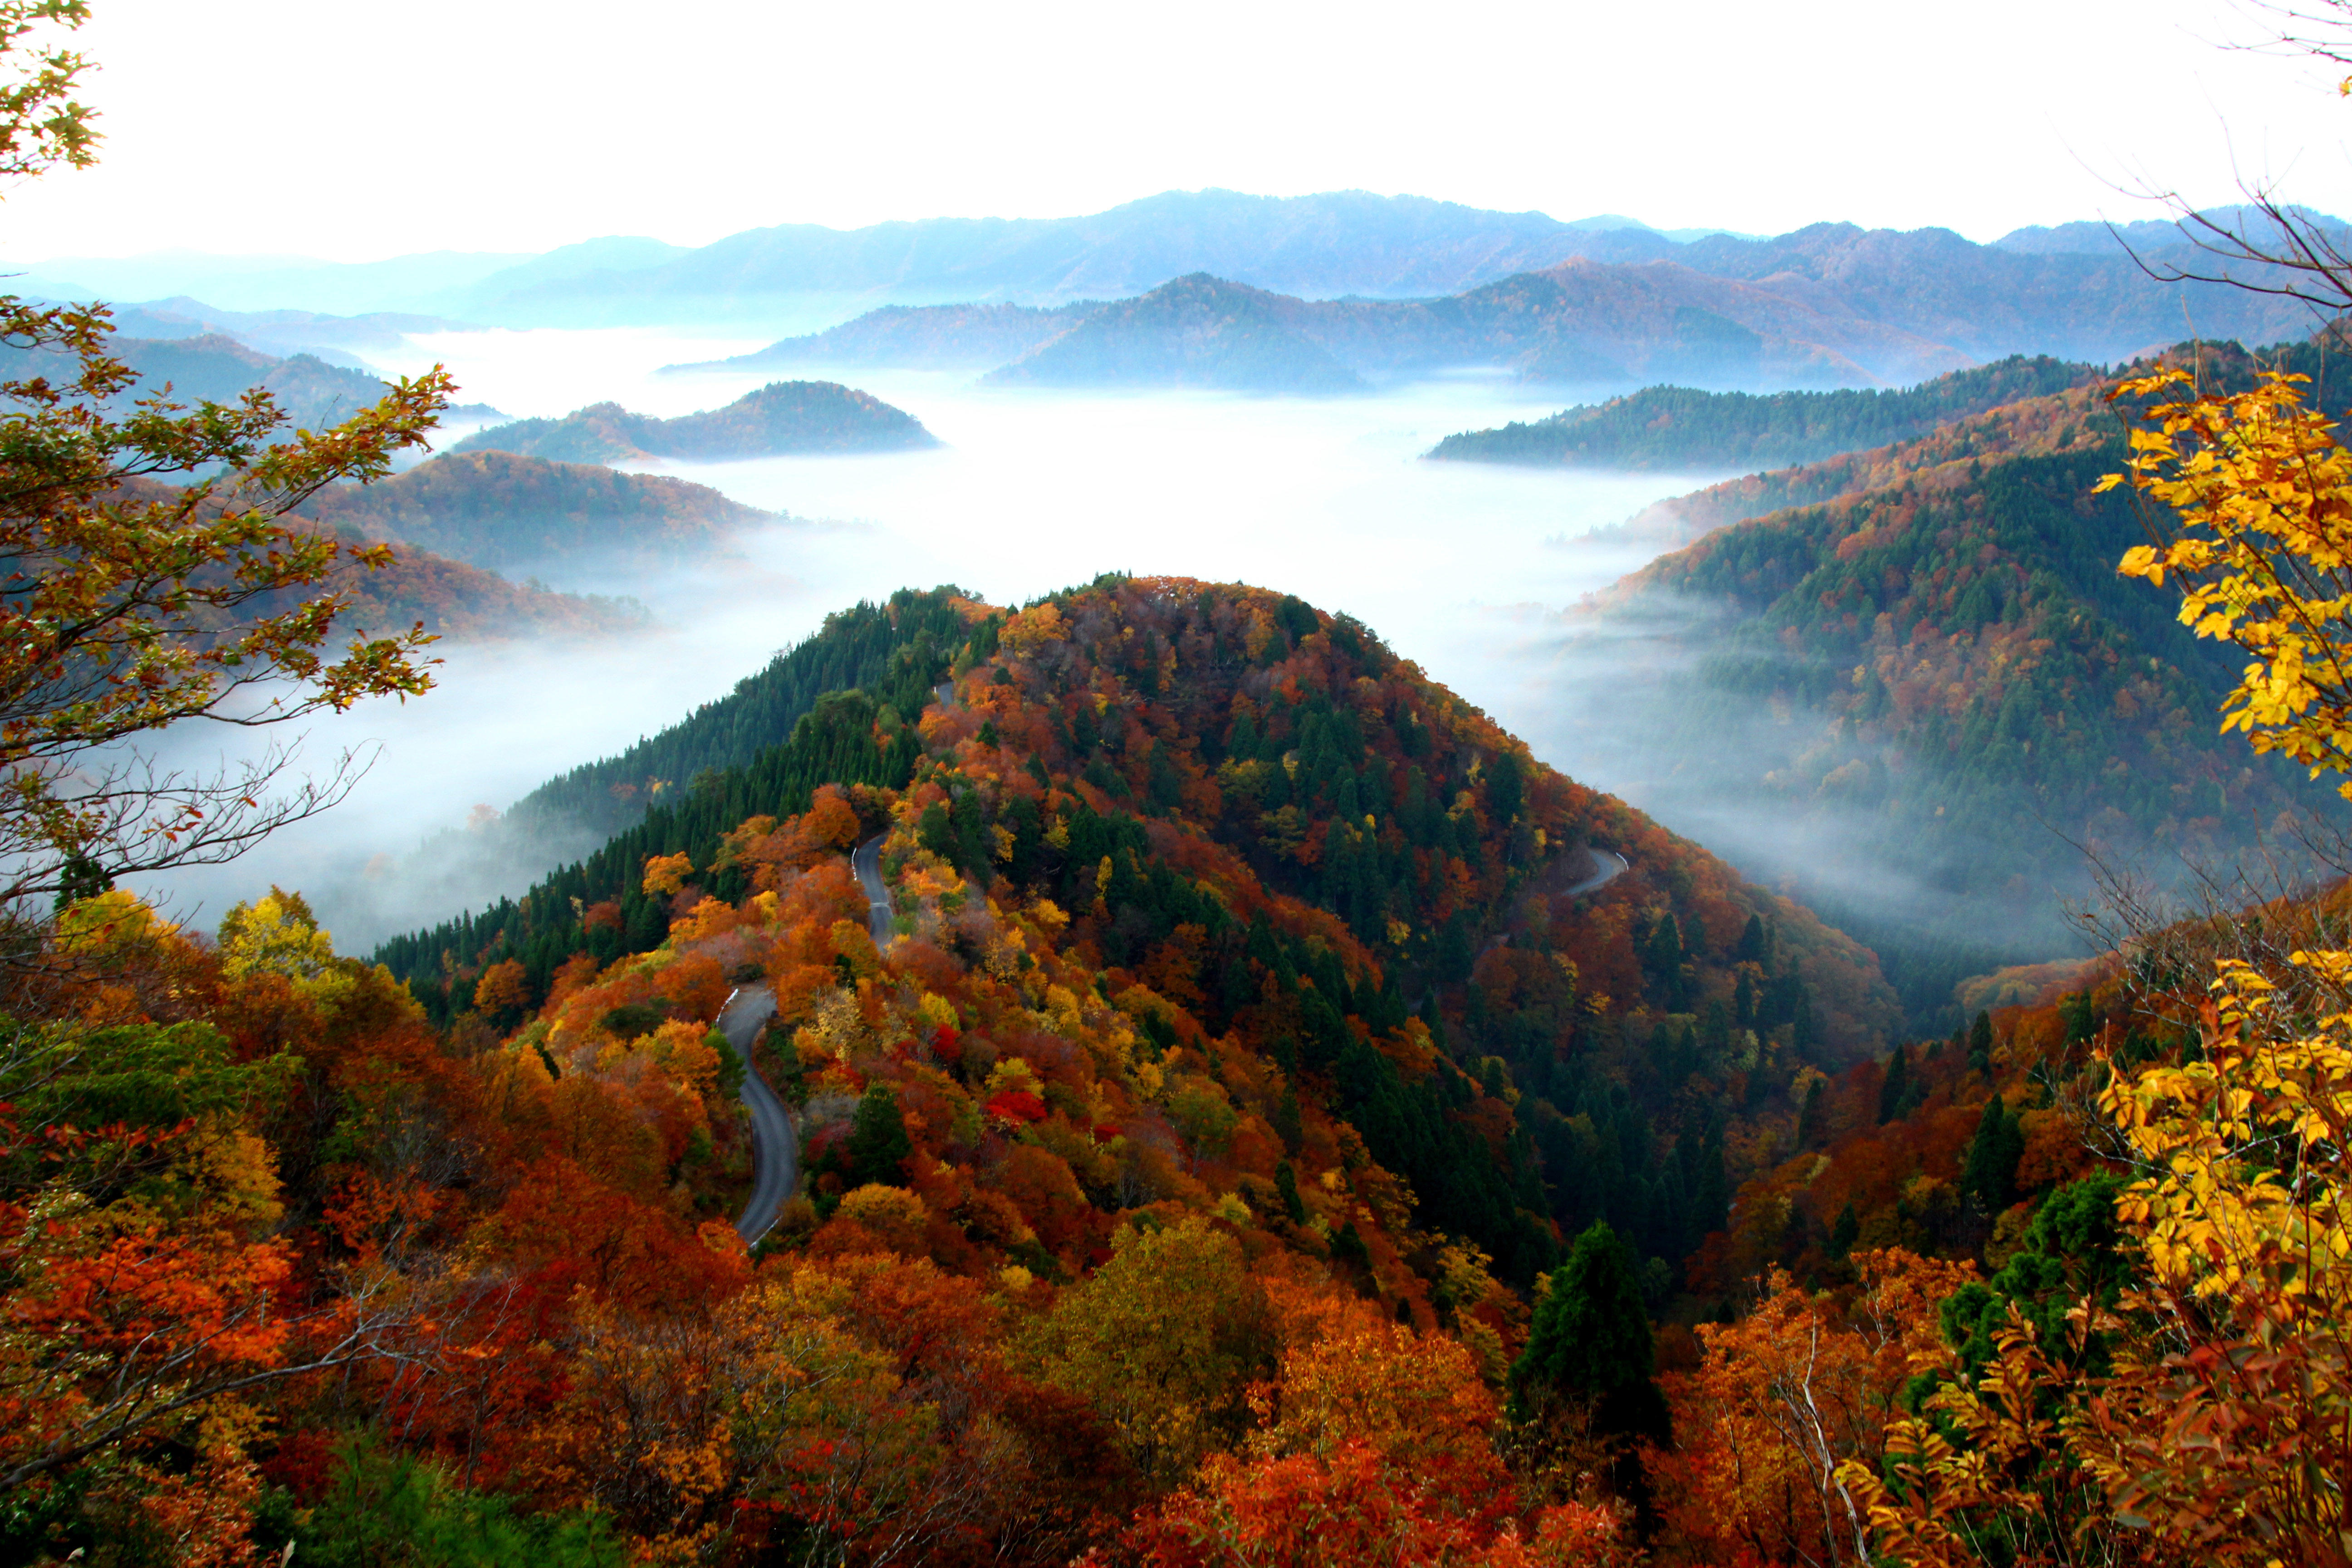 Sea of clouds and autumn leaves of Onyu Valley